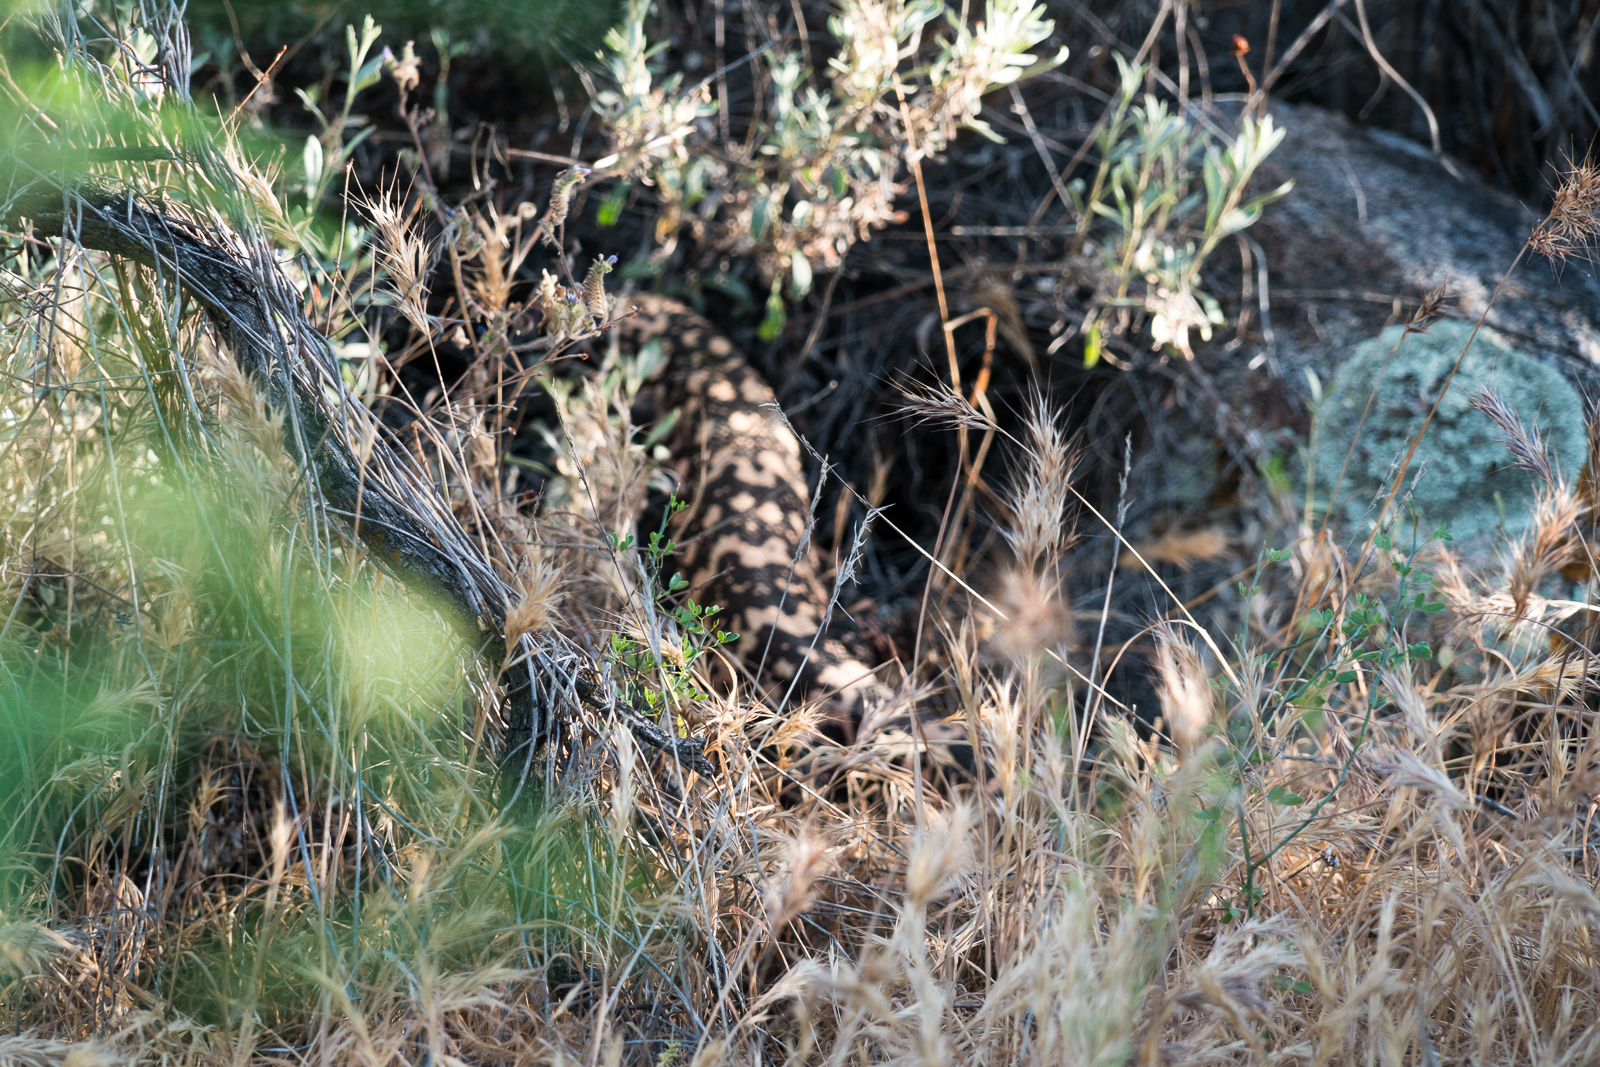 A Gila Monster outwitting my efforts to get a picture - just above Alamo Canyon. April 2016.